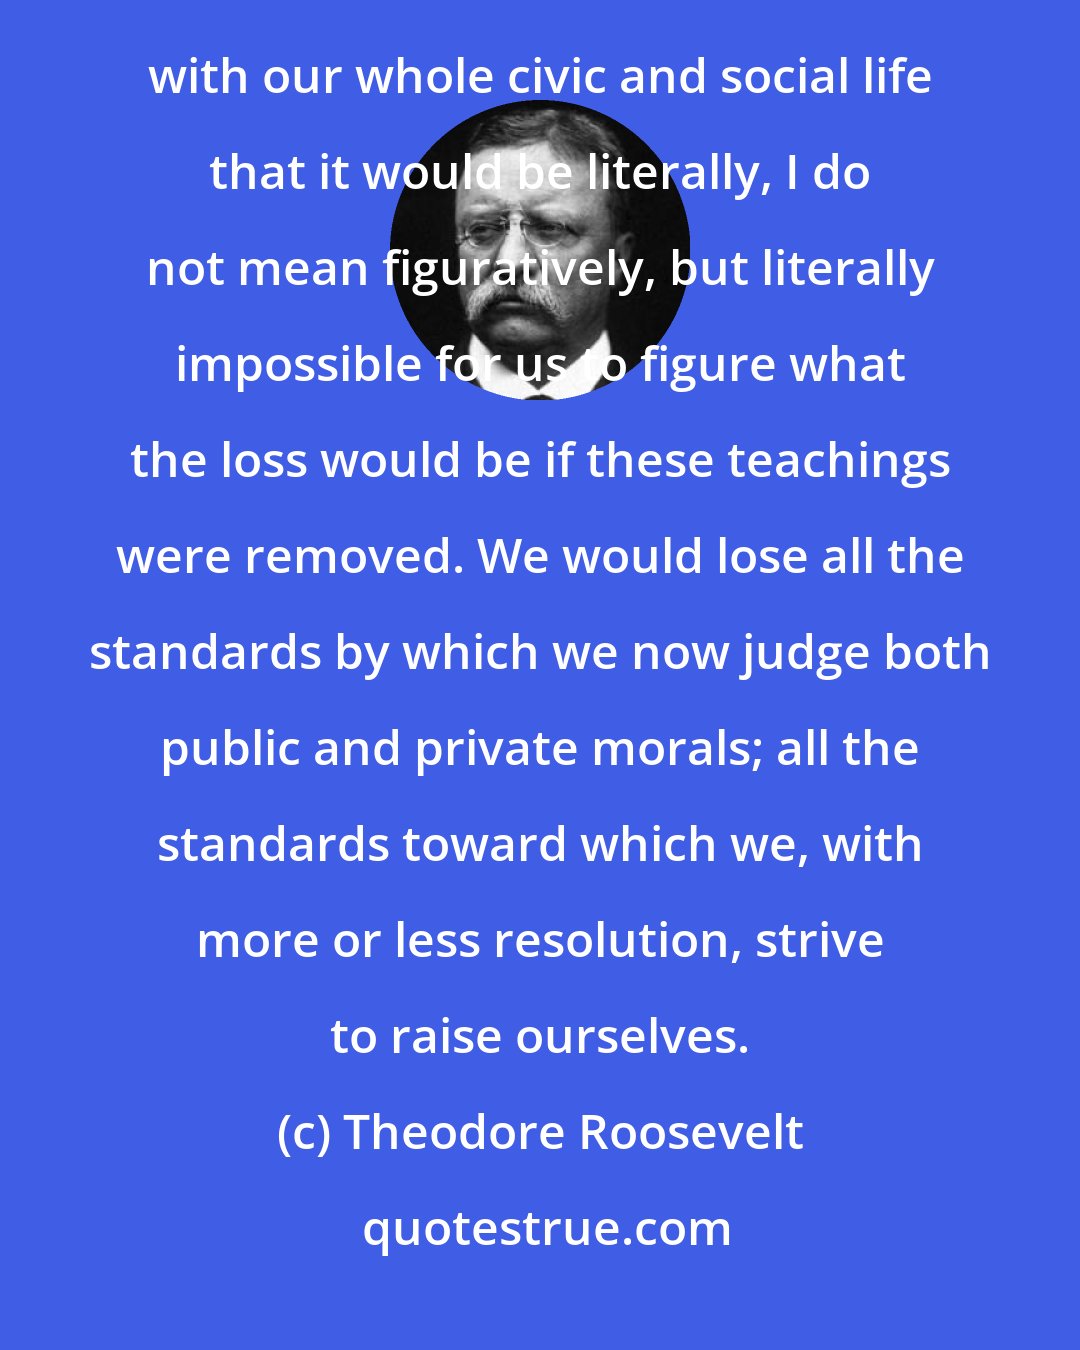 Theodore Roosevelt: Every thinking man, when he thinks, realizes that the teachings of the Bible are so interwoven and intertwined with our whole civic and social life that it would be literally, I do not mean figuratively, but literally impossible for us to figure what the loss would be if these teachings were removed. We would lose all the standards by which we now judge both public and private morals; all the standards toward which we, with more or less resolution, strive to raise ourselves.